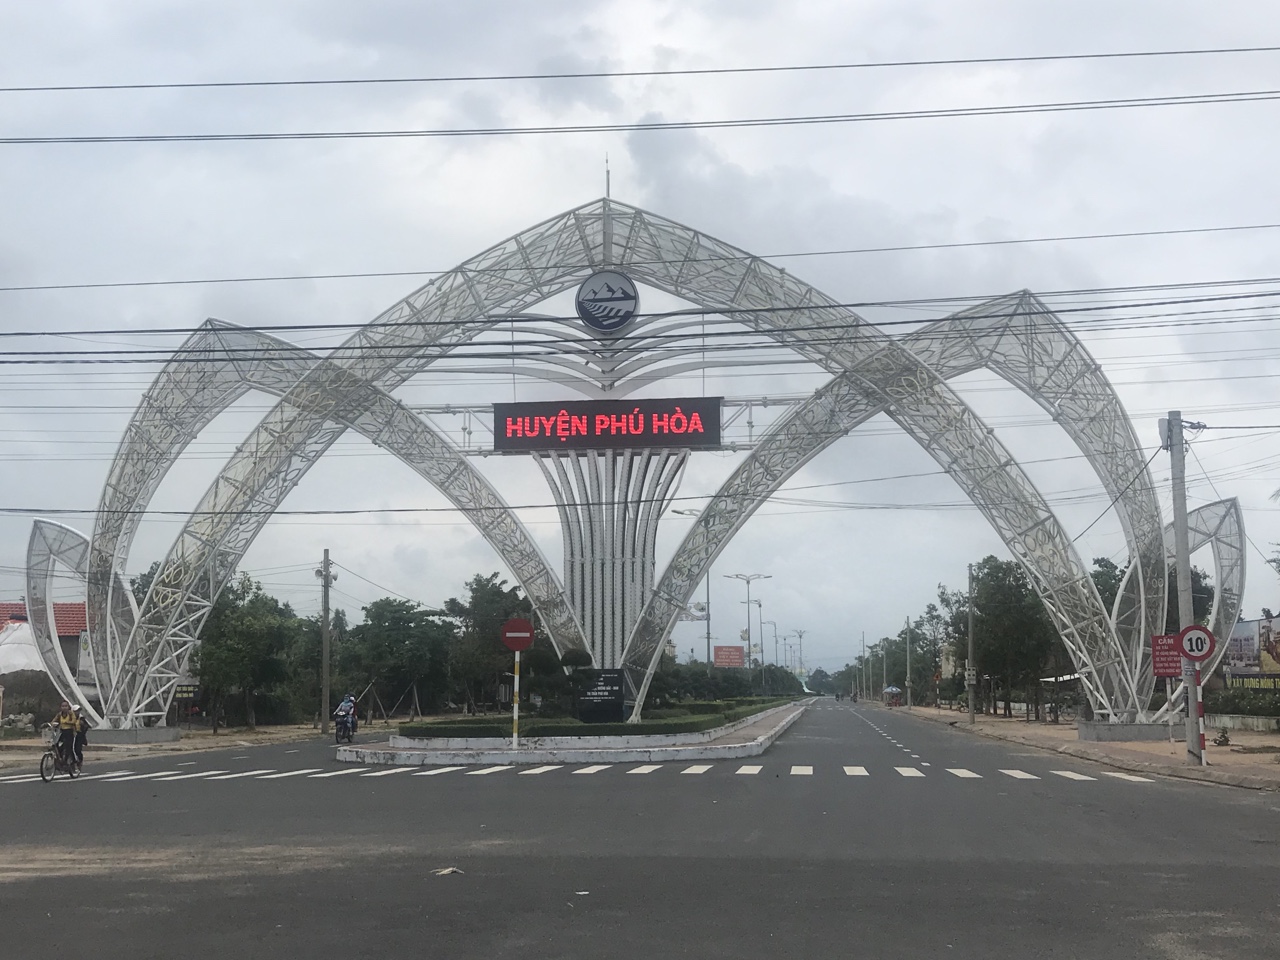 PHU YEN TTP JOINT STOCK COMPANY FUNDS FUNDING TO BUILD A GATEER WELCOME TO PHU HOA DISTRICT